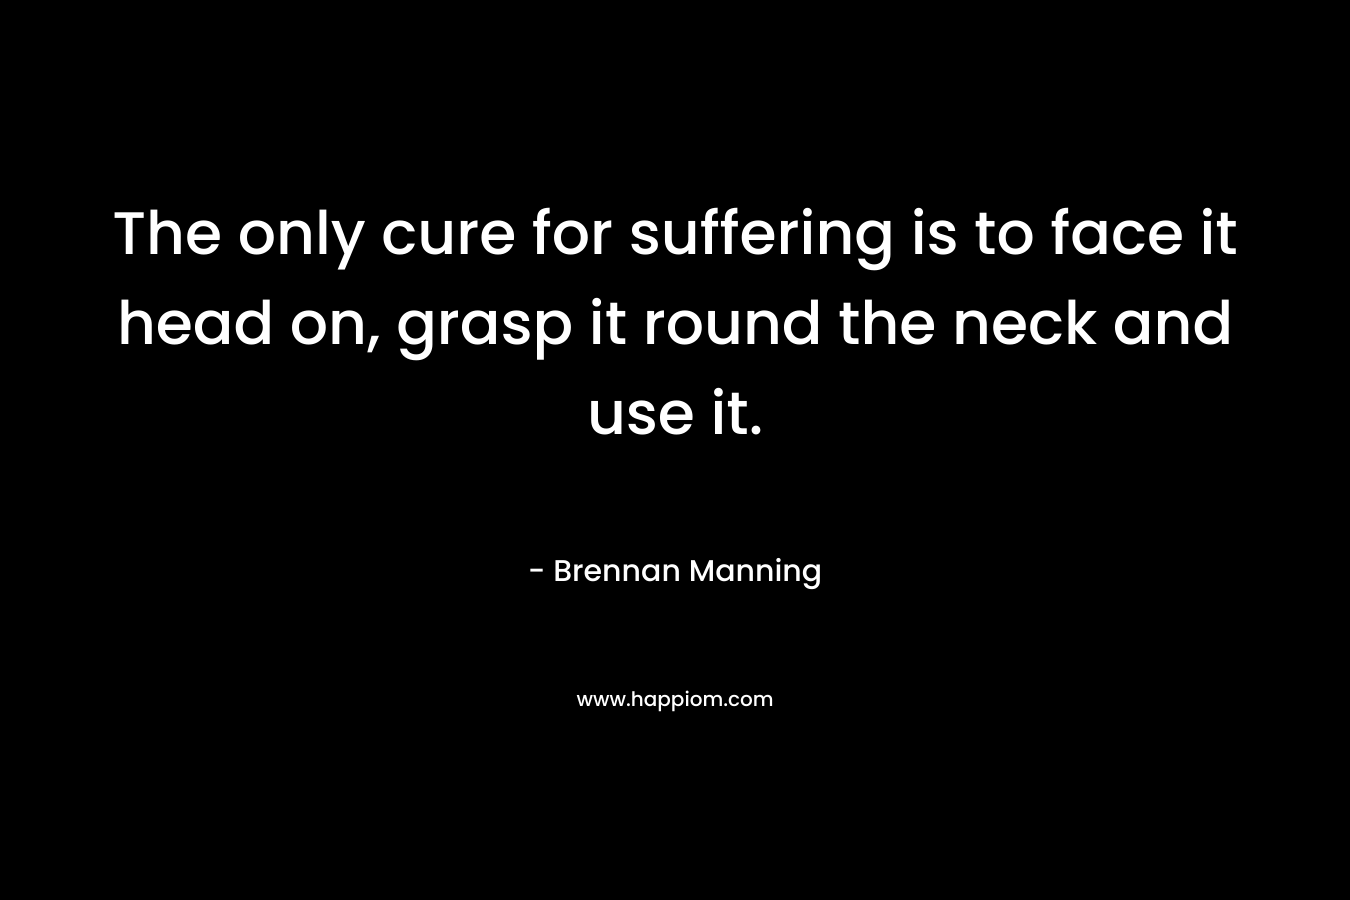 The only cure for suffering is to face it head on, grasp it round the neck and use it.